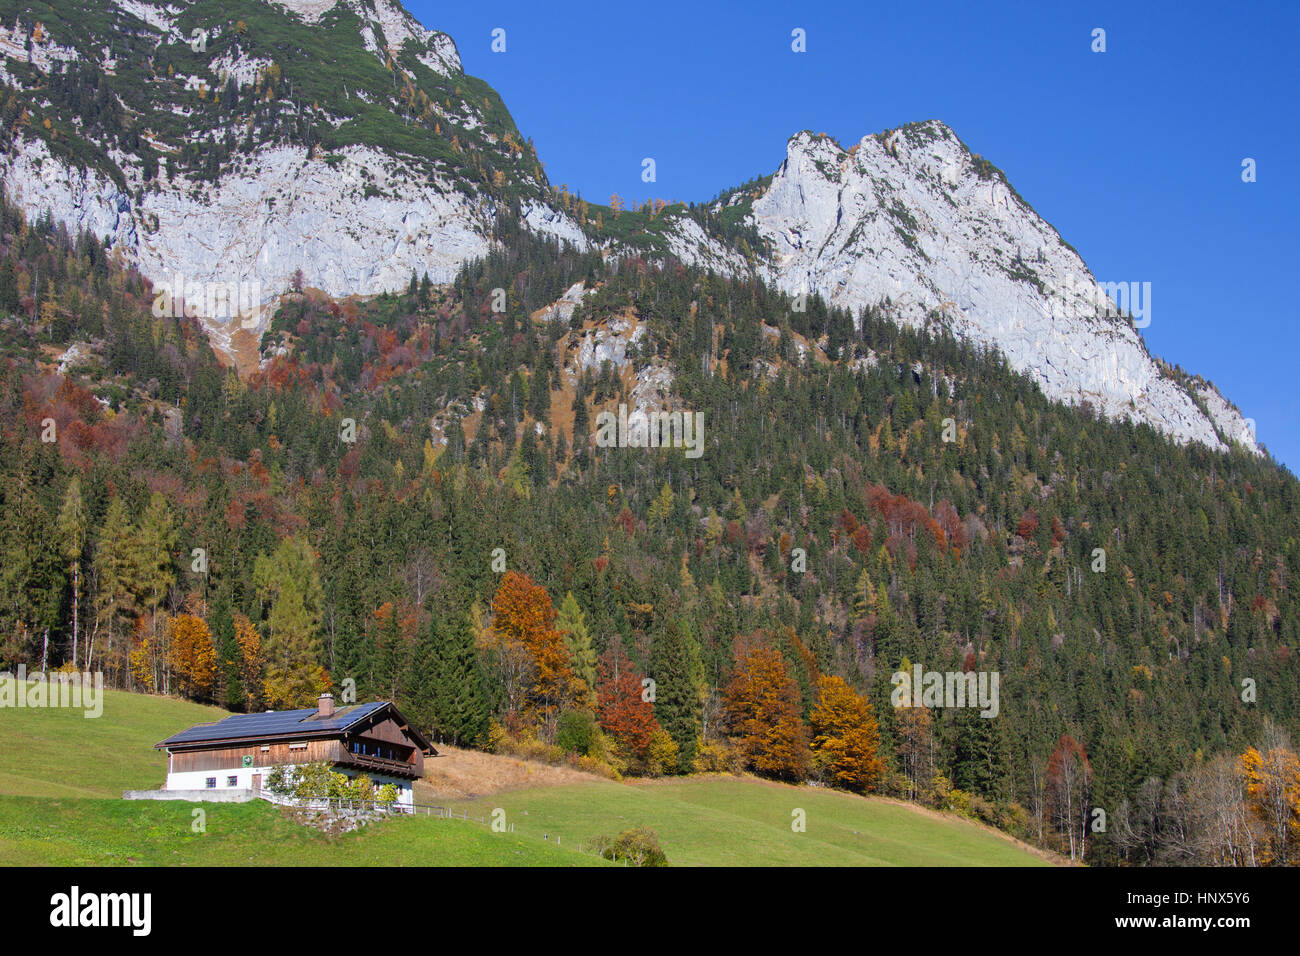 Traditional house with solar panels on roof near Hintersee at Ramsau, Berchtesgadener Land, Upper Bavaria, Germany Stock Photo